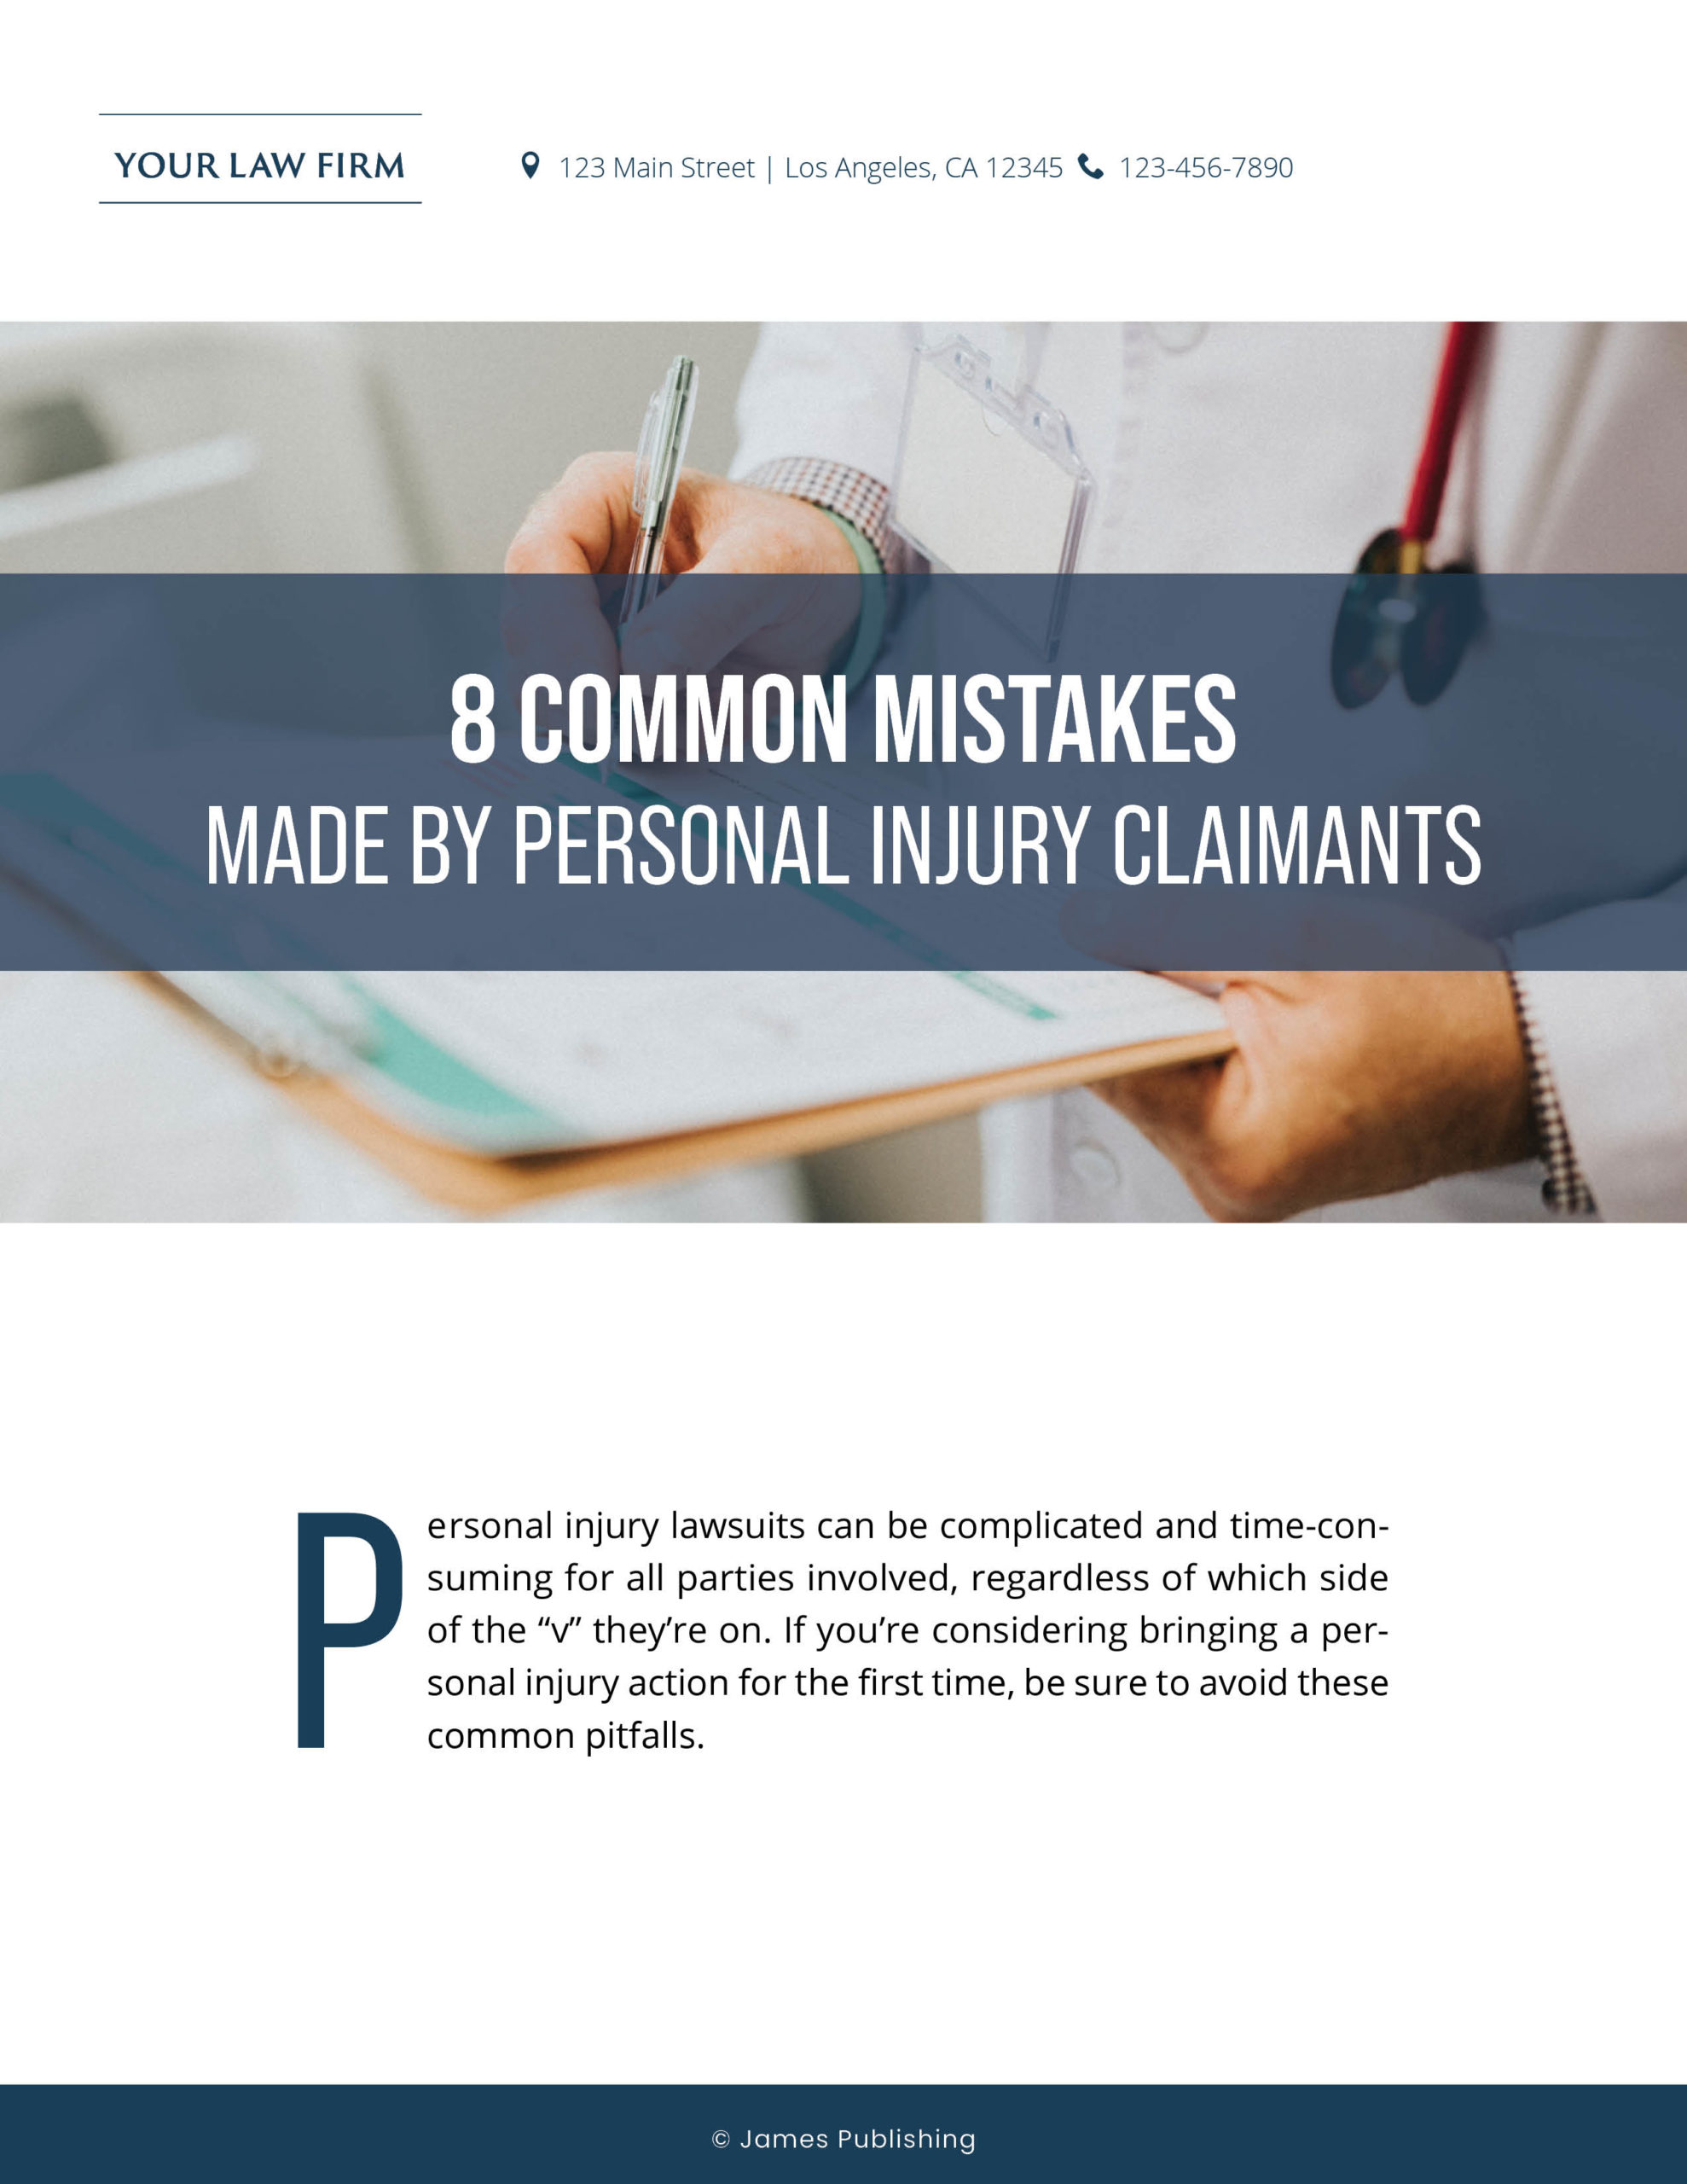 PI-13 Common Mistakes Made by Personal Injury Claimants